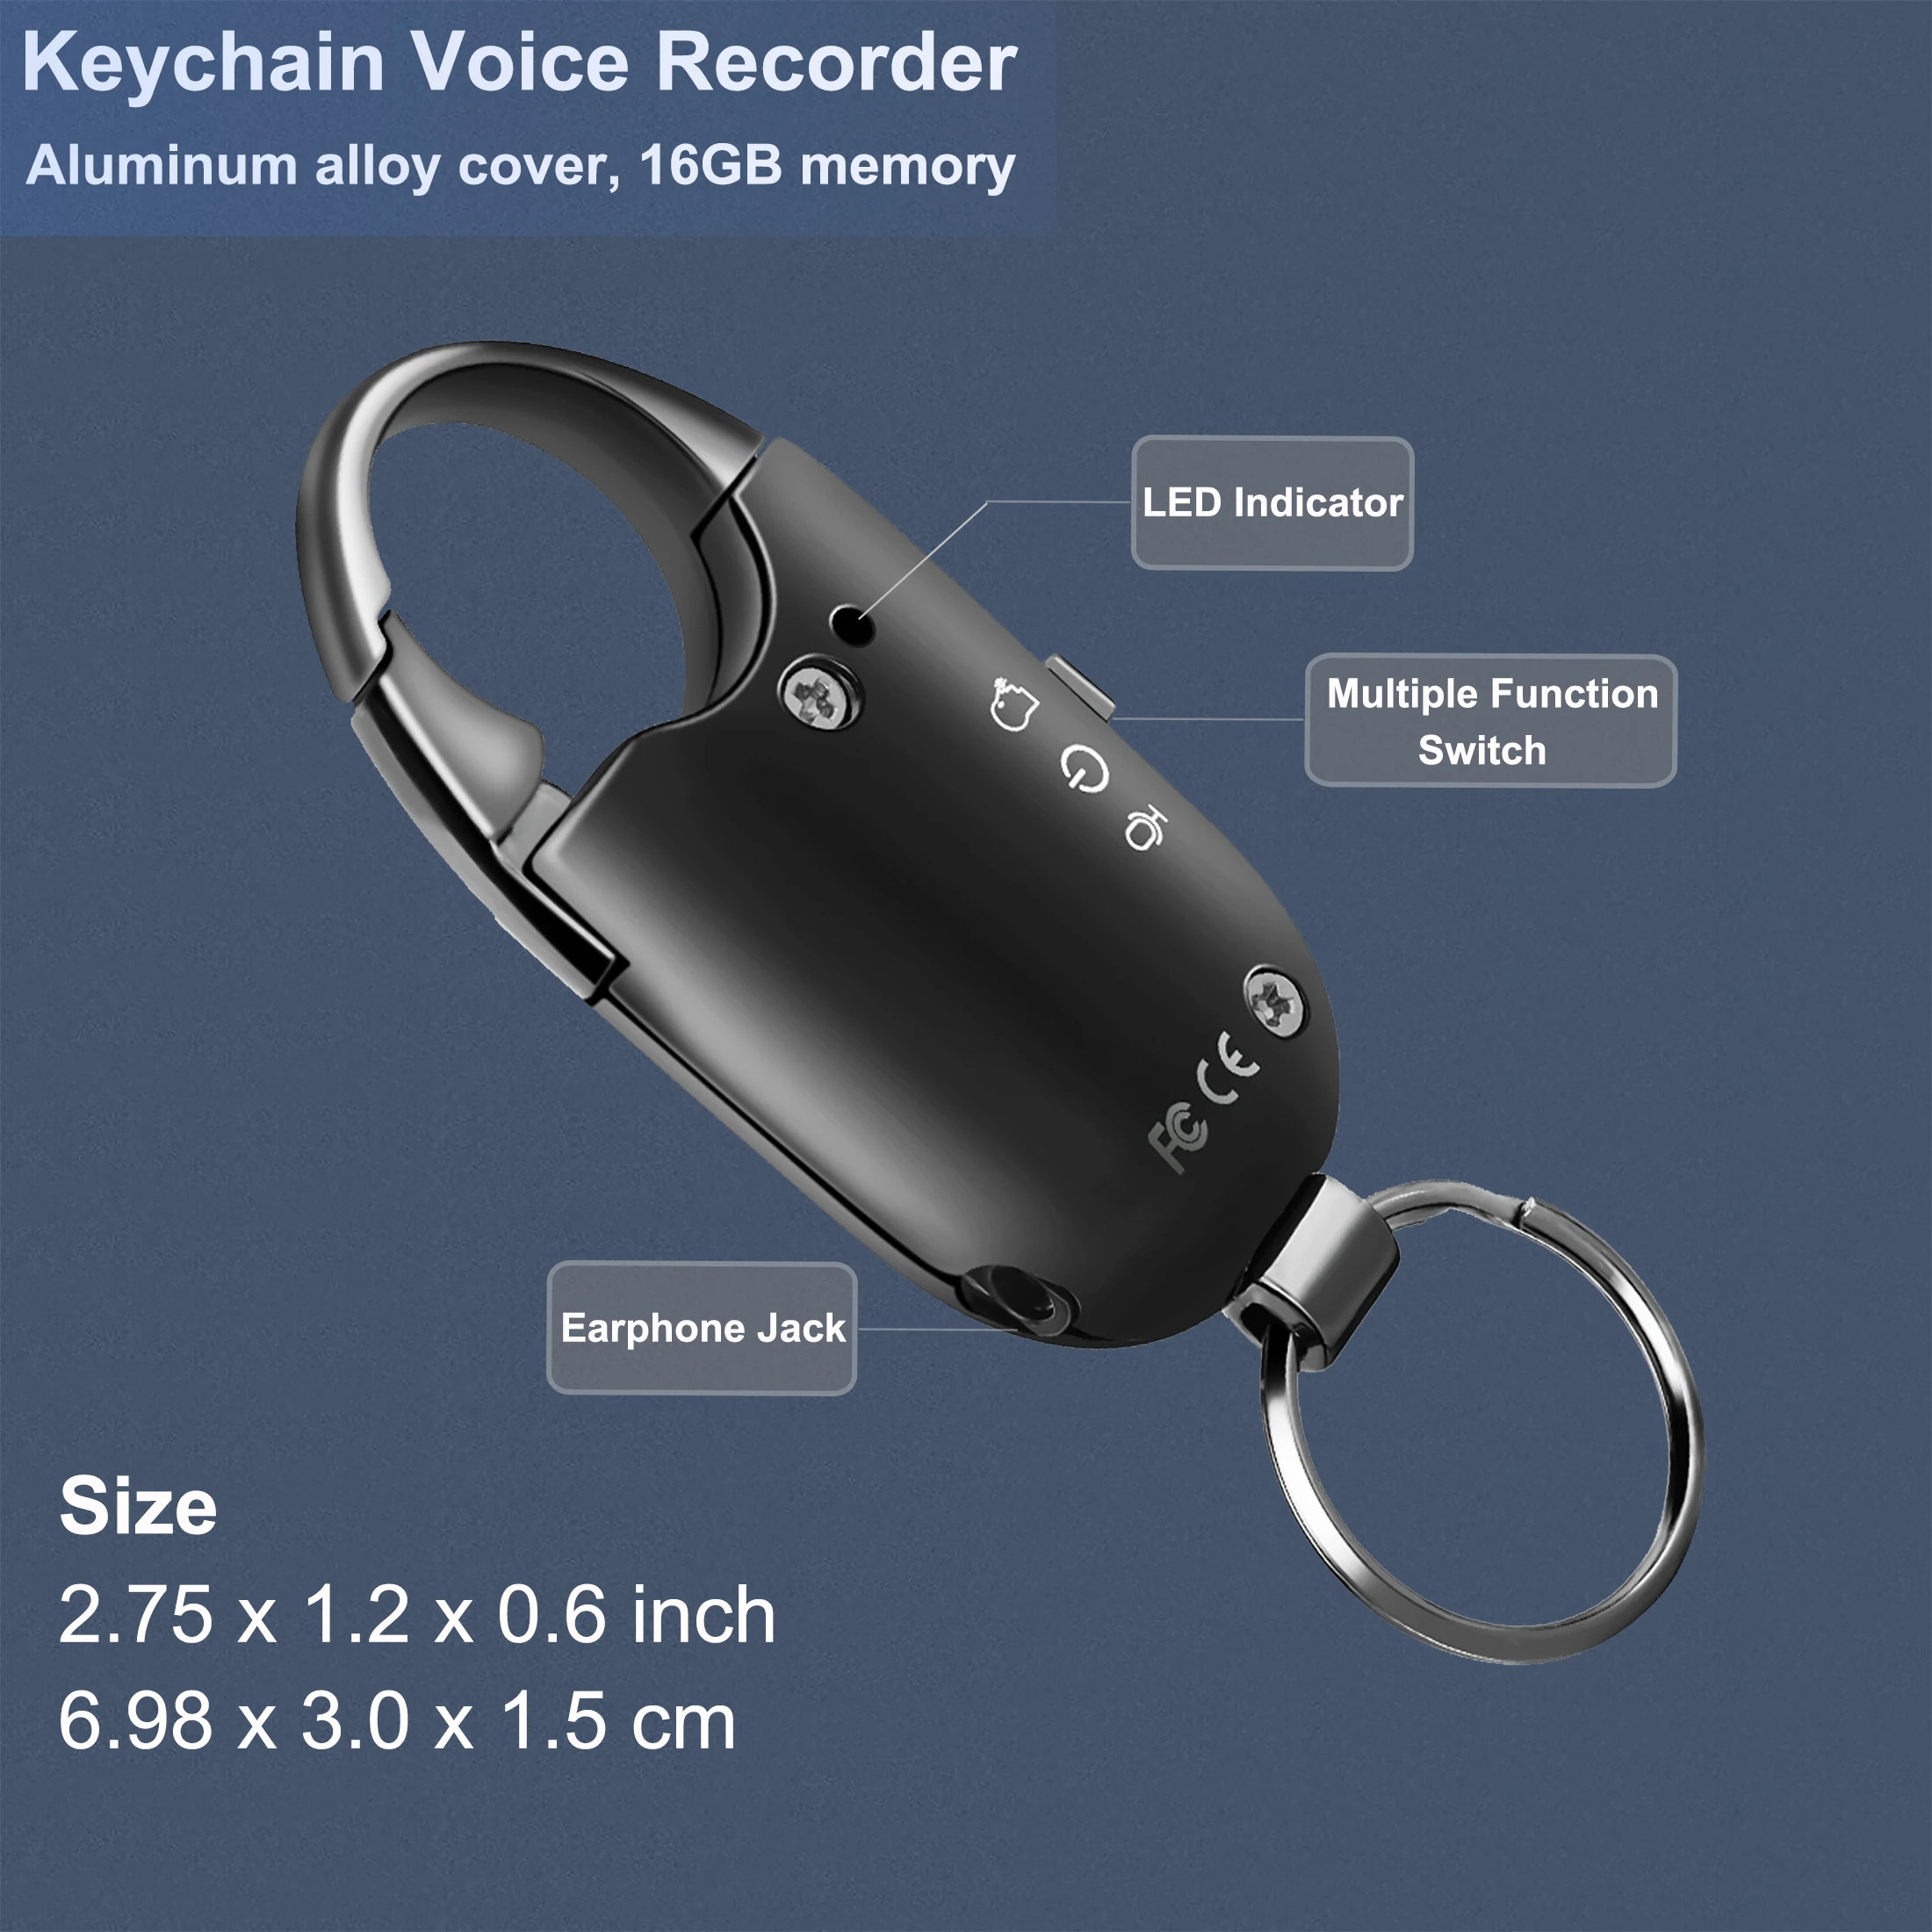 

Digital Voice Recorder, Voice Activated Recording, Intelligent Noise Reduction, Supports 15 Hours of Recording Continuously 16GB